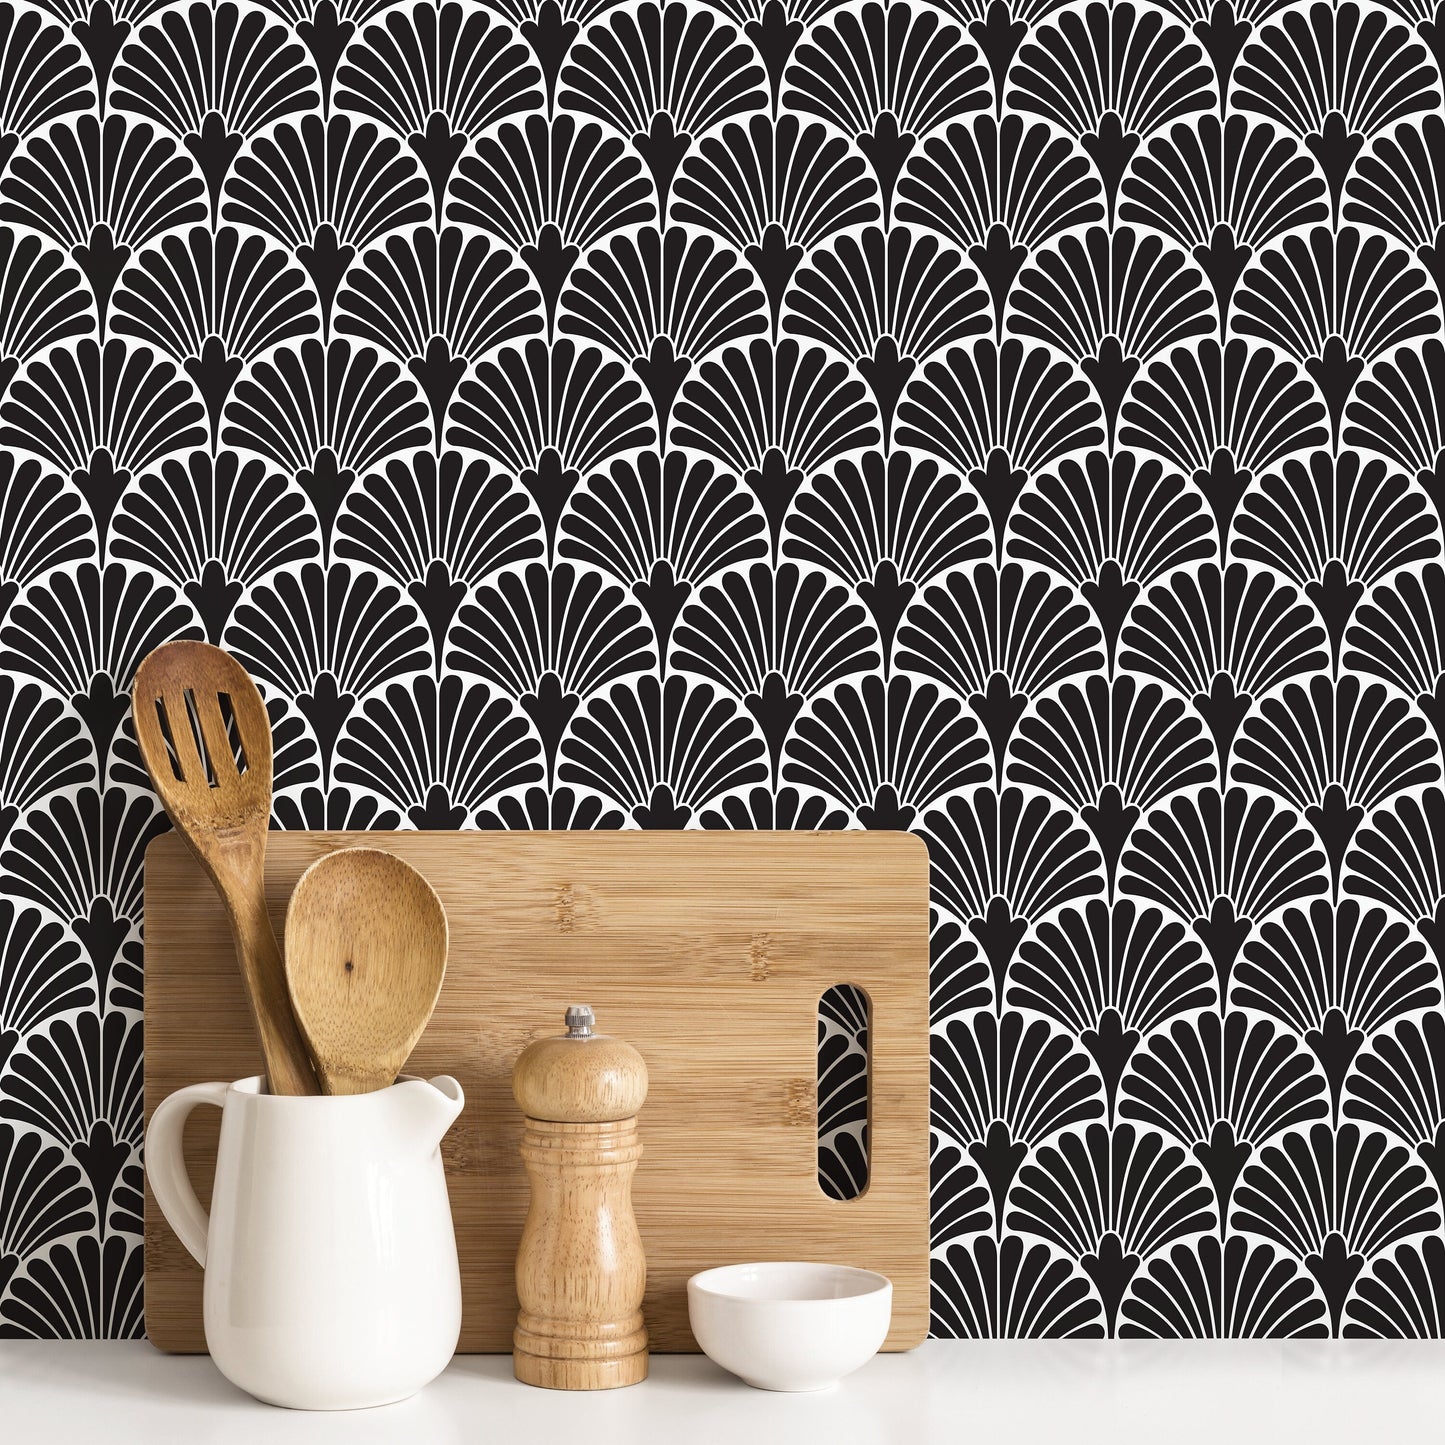 Wallpaper Peel and Stick Wallpaper Removable Wallpaper Home Decor Wall Art Wall Decor Room Decor / Black and White Art Deco Wallpaper - C365